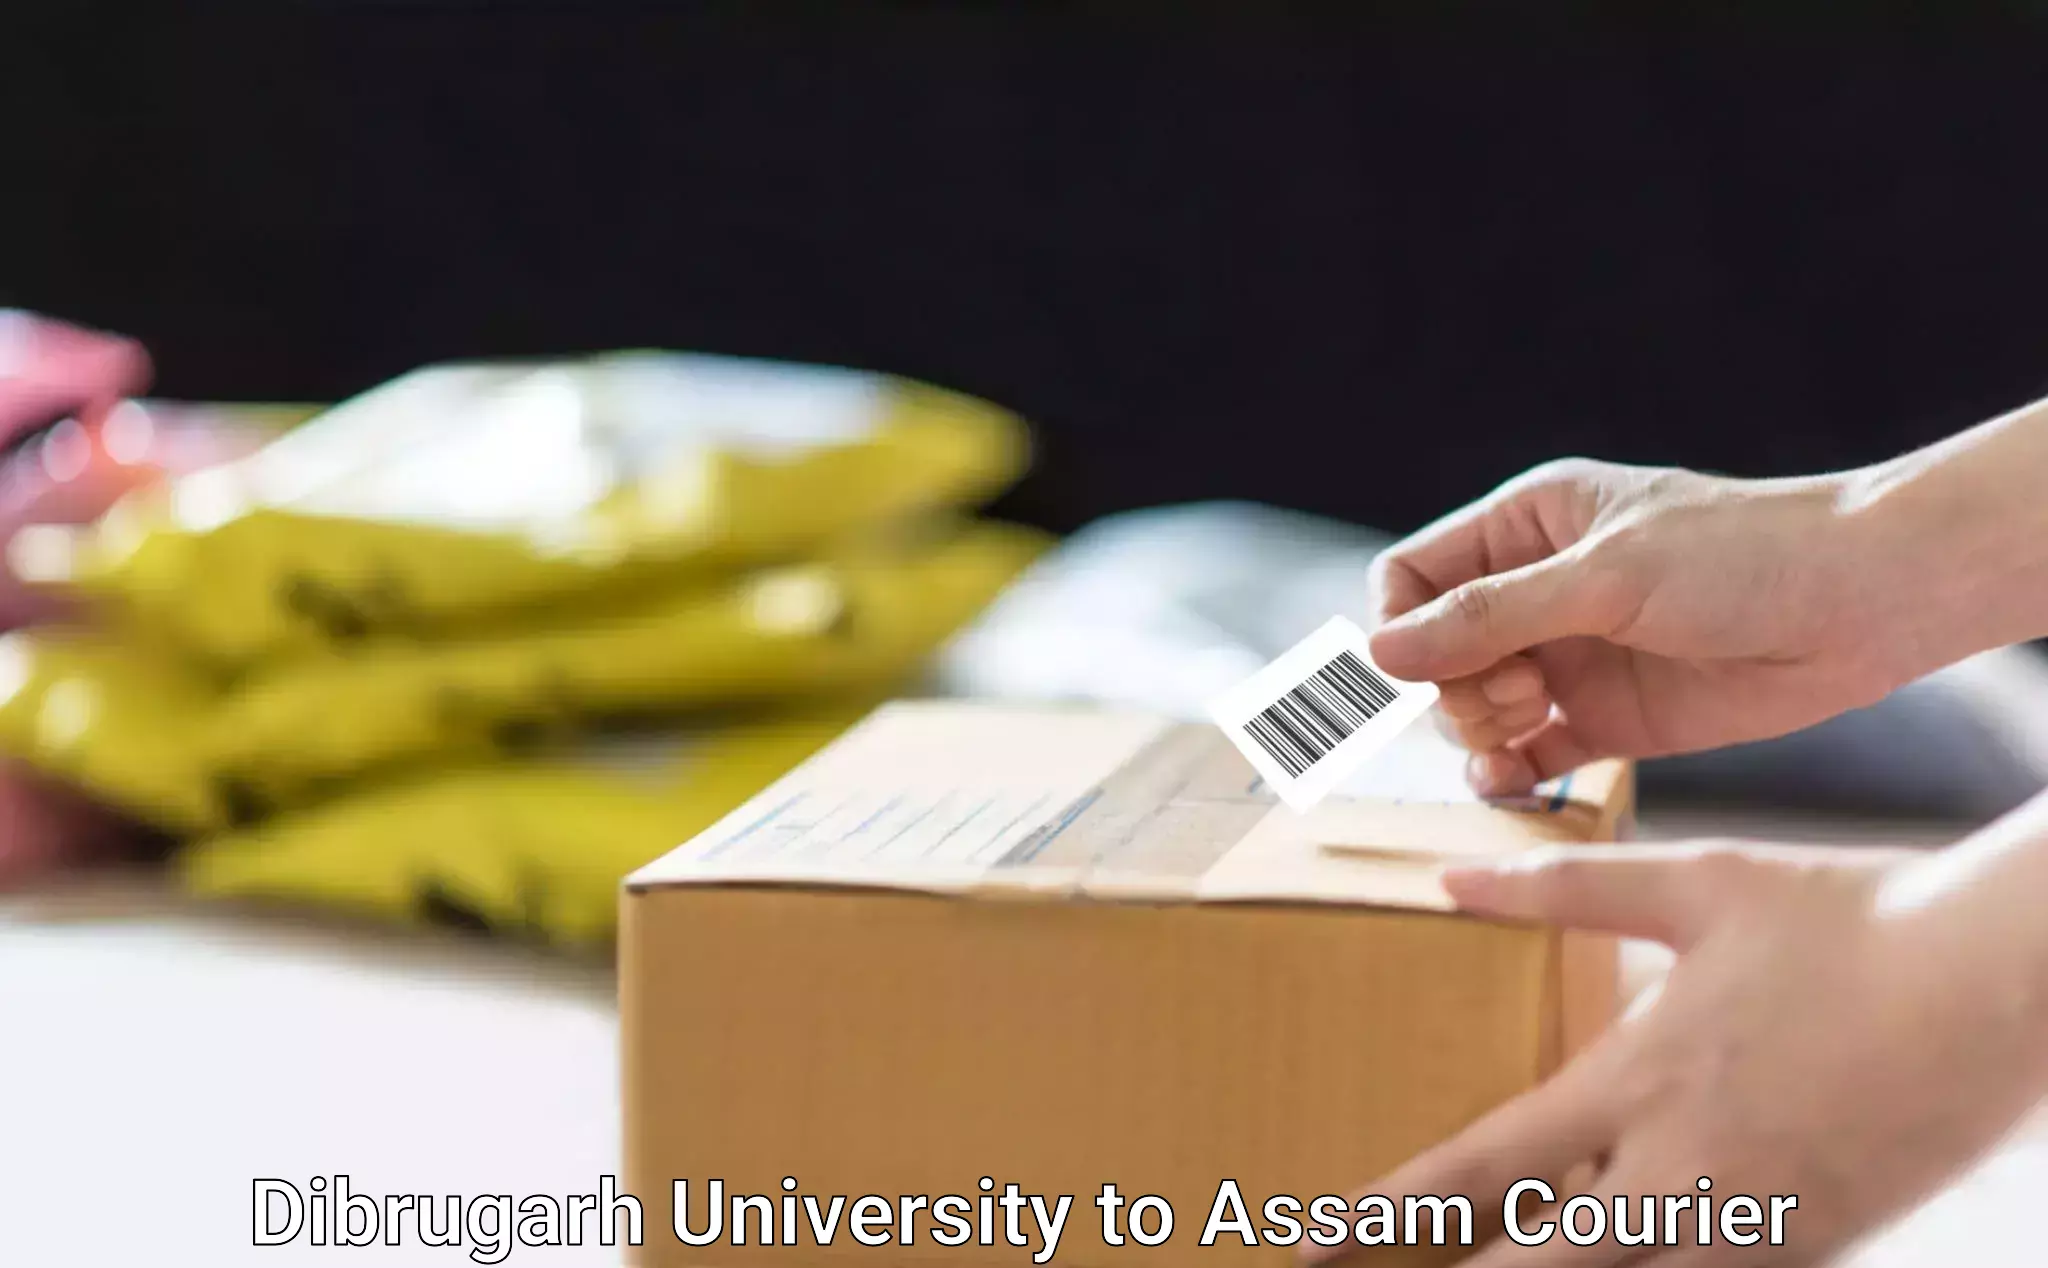 Courier service efficiency Dibrugarh University to Nagaon